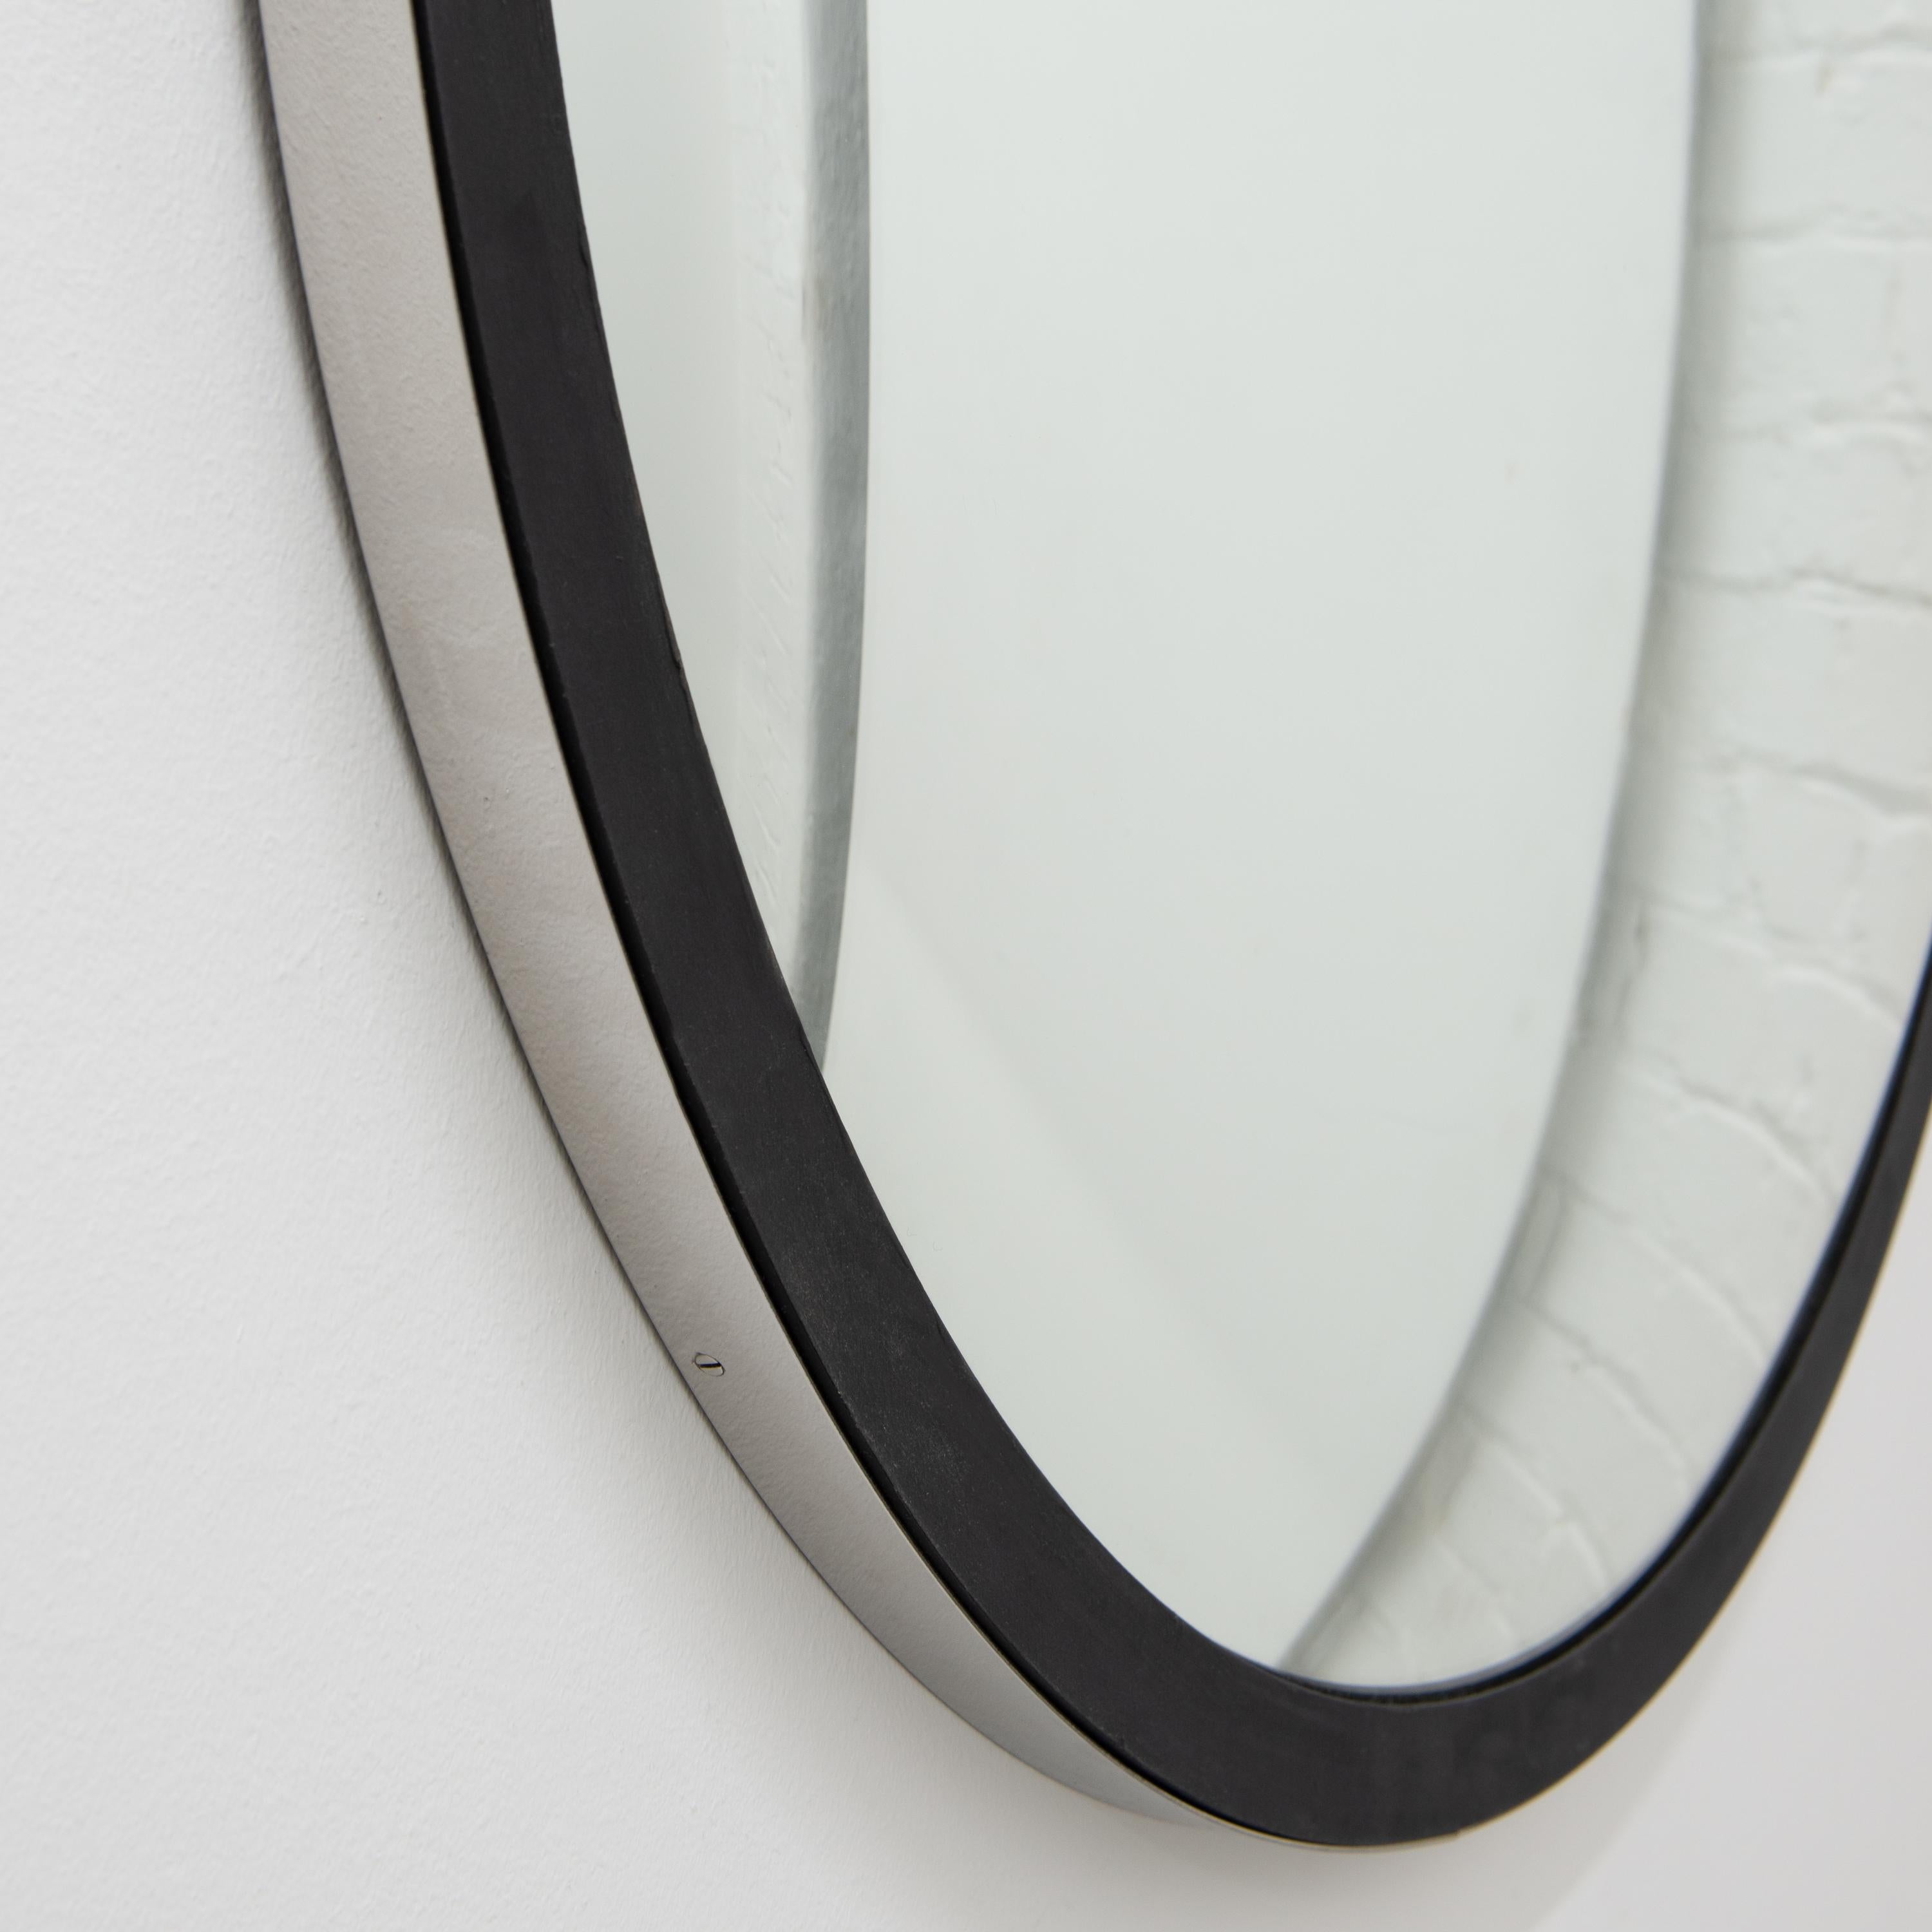 British Orbis Handcrafted Round Convex Mirror, Stainless Steel and Black Frame, Large For Sale